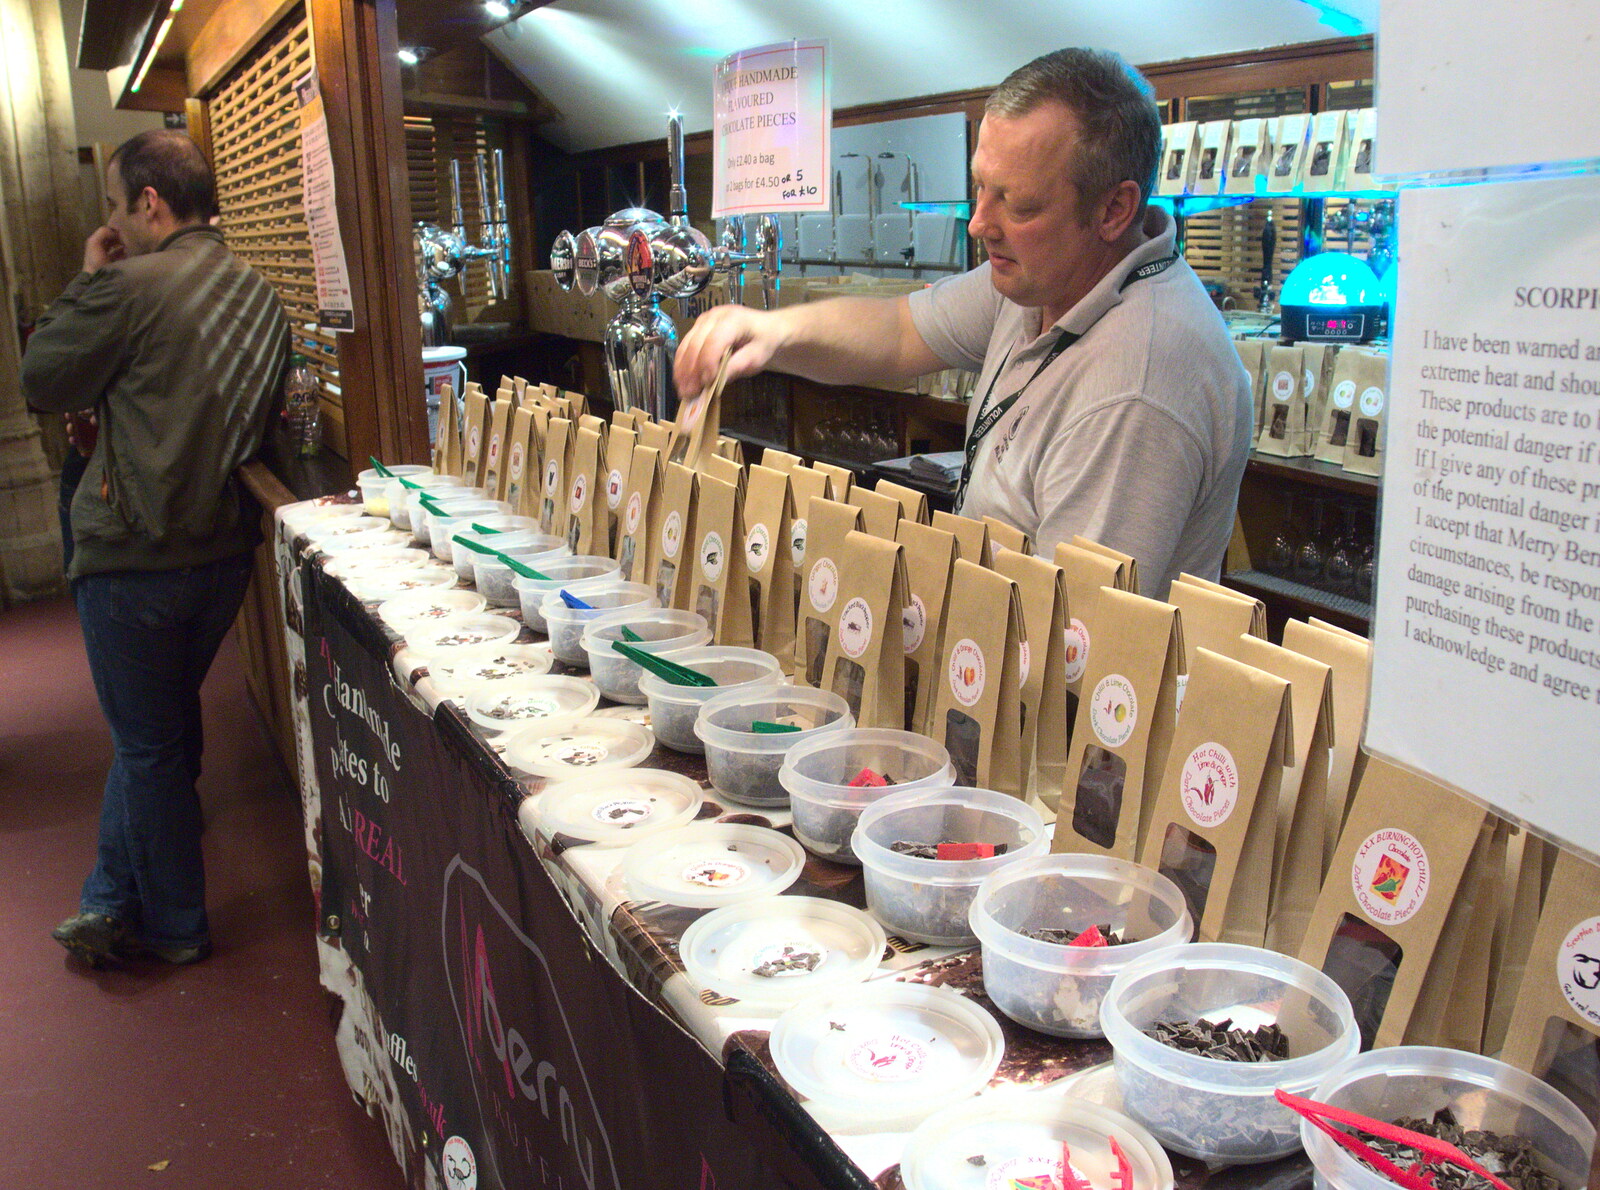 A chocolate maker sells Scorpion Death Chili from The 38th Norwich Beer Festival, Norwich, Norfolk - 28th October 2015